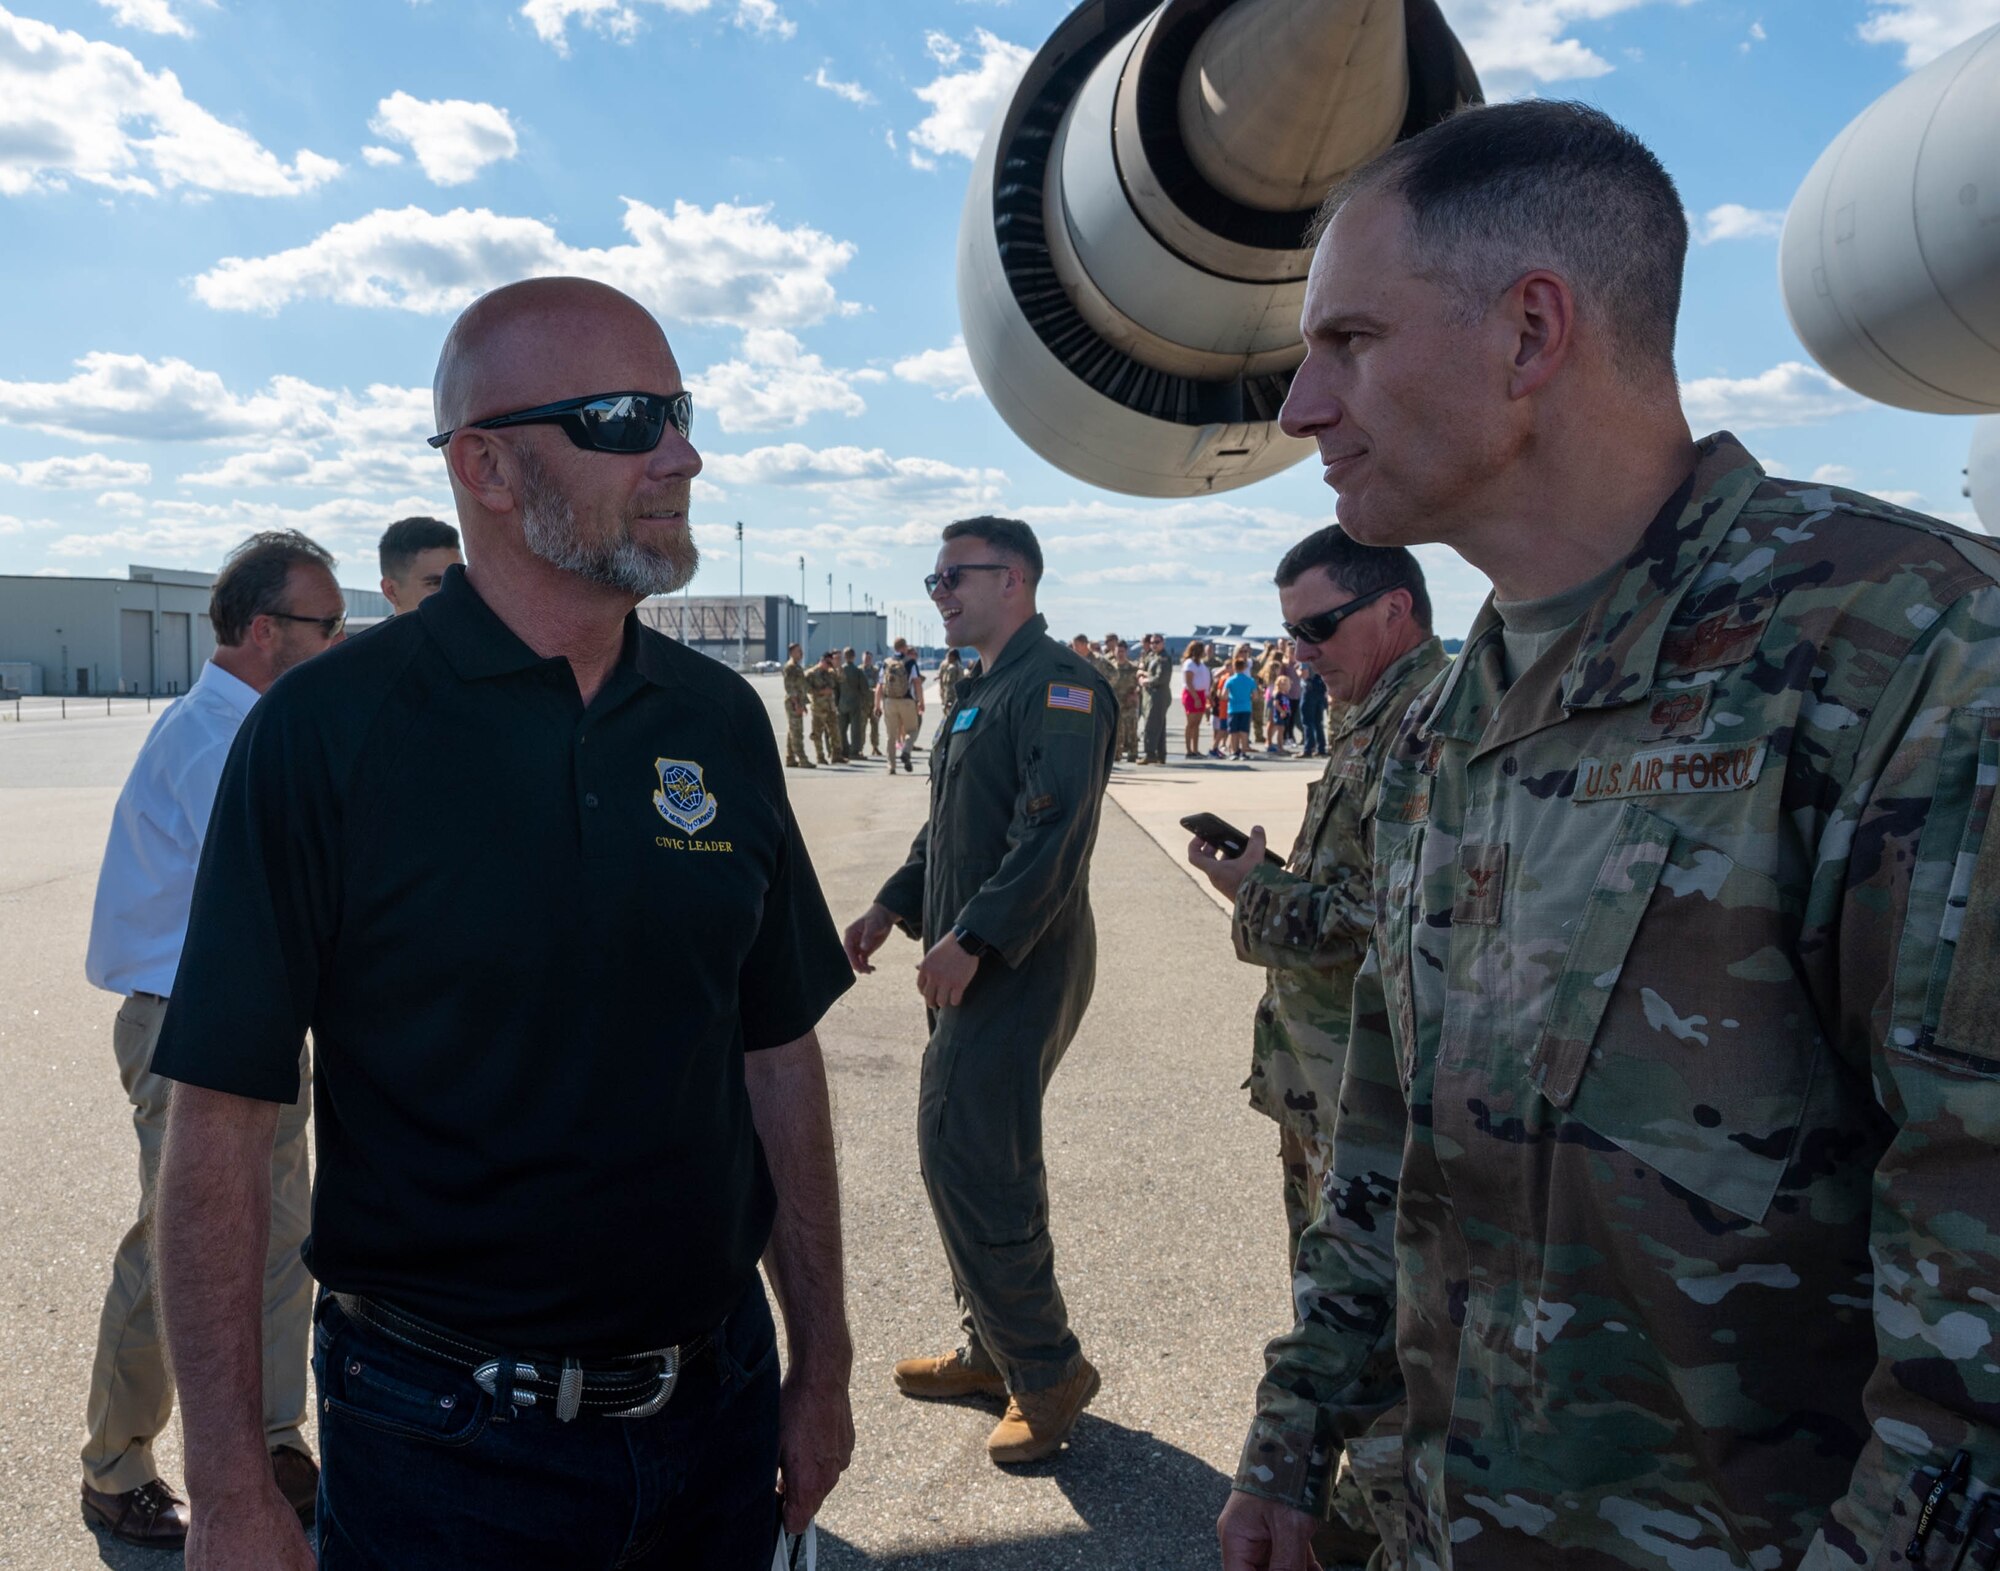 Bobby Pancake, left, Air Mobility Command civic leader, speaks with Col. Matt Husemann, 436th Airlift Wing commander, after an incentive flight on a C-5M Super Galaxy at Dover Air Force Base, Delaware, June 23, 2021. The Dover AFB honorary commanders program encourages an exchange of ideas, experiences and friendships between key members of the local community and Dover AFB. (U.S. Air Force photos by Senior Airman Faith Schaefer)